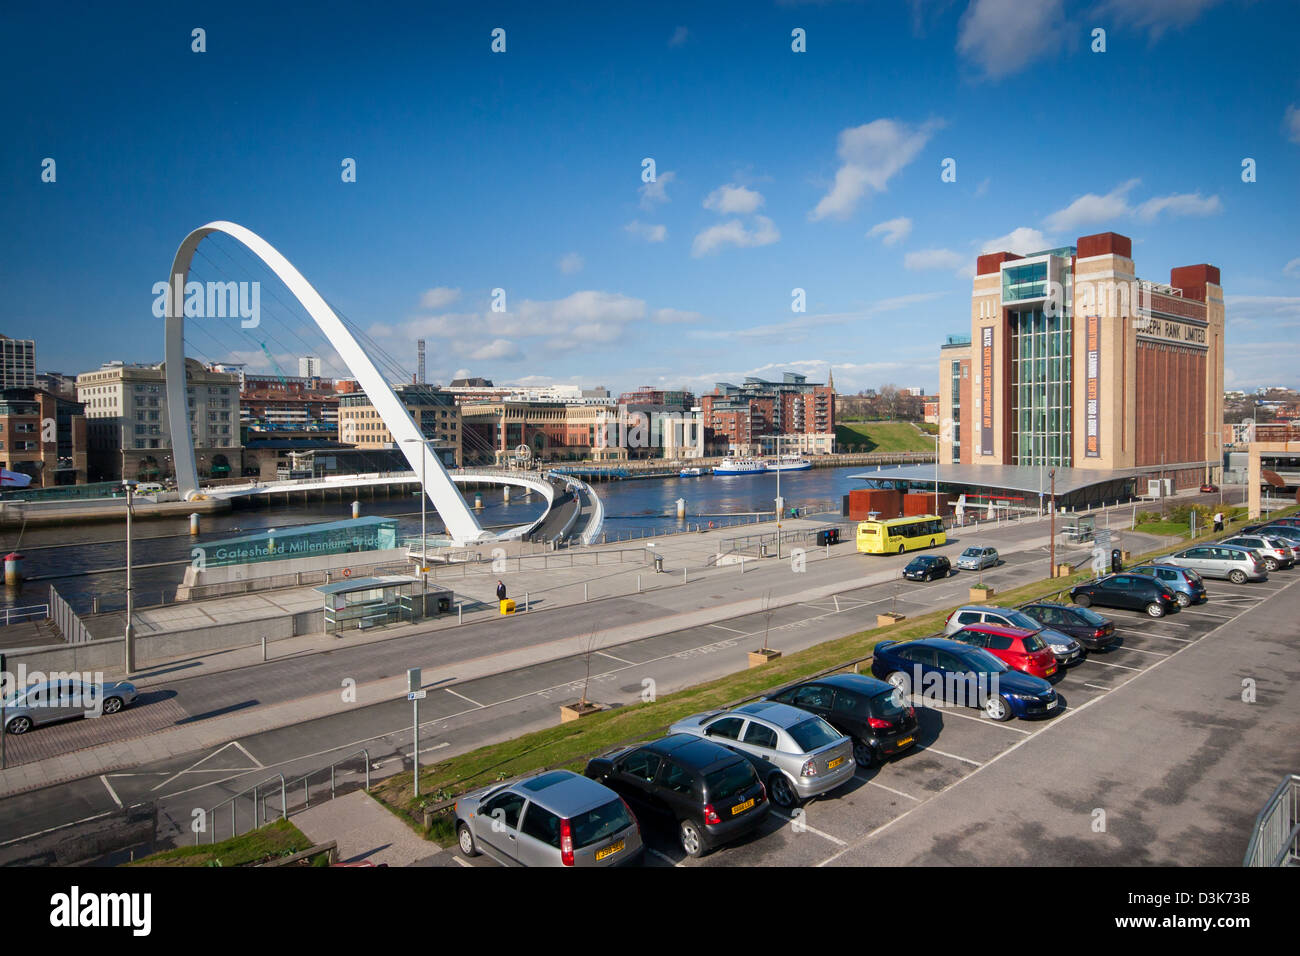 The Baltic Centre for Contemporary Art and The Millennium Bridge at Gateshead Quays Stock Photo